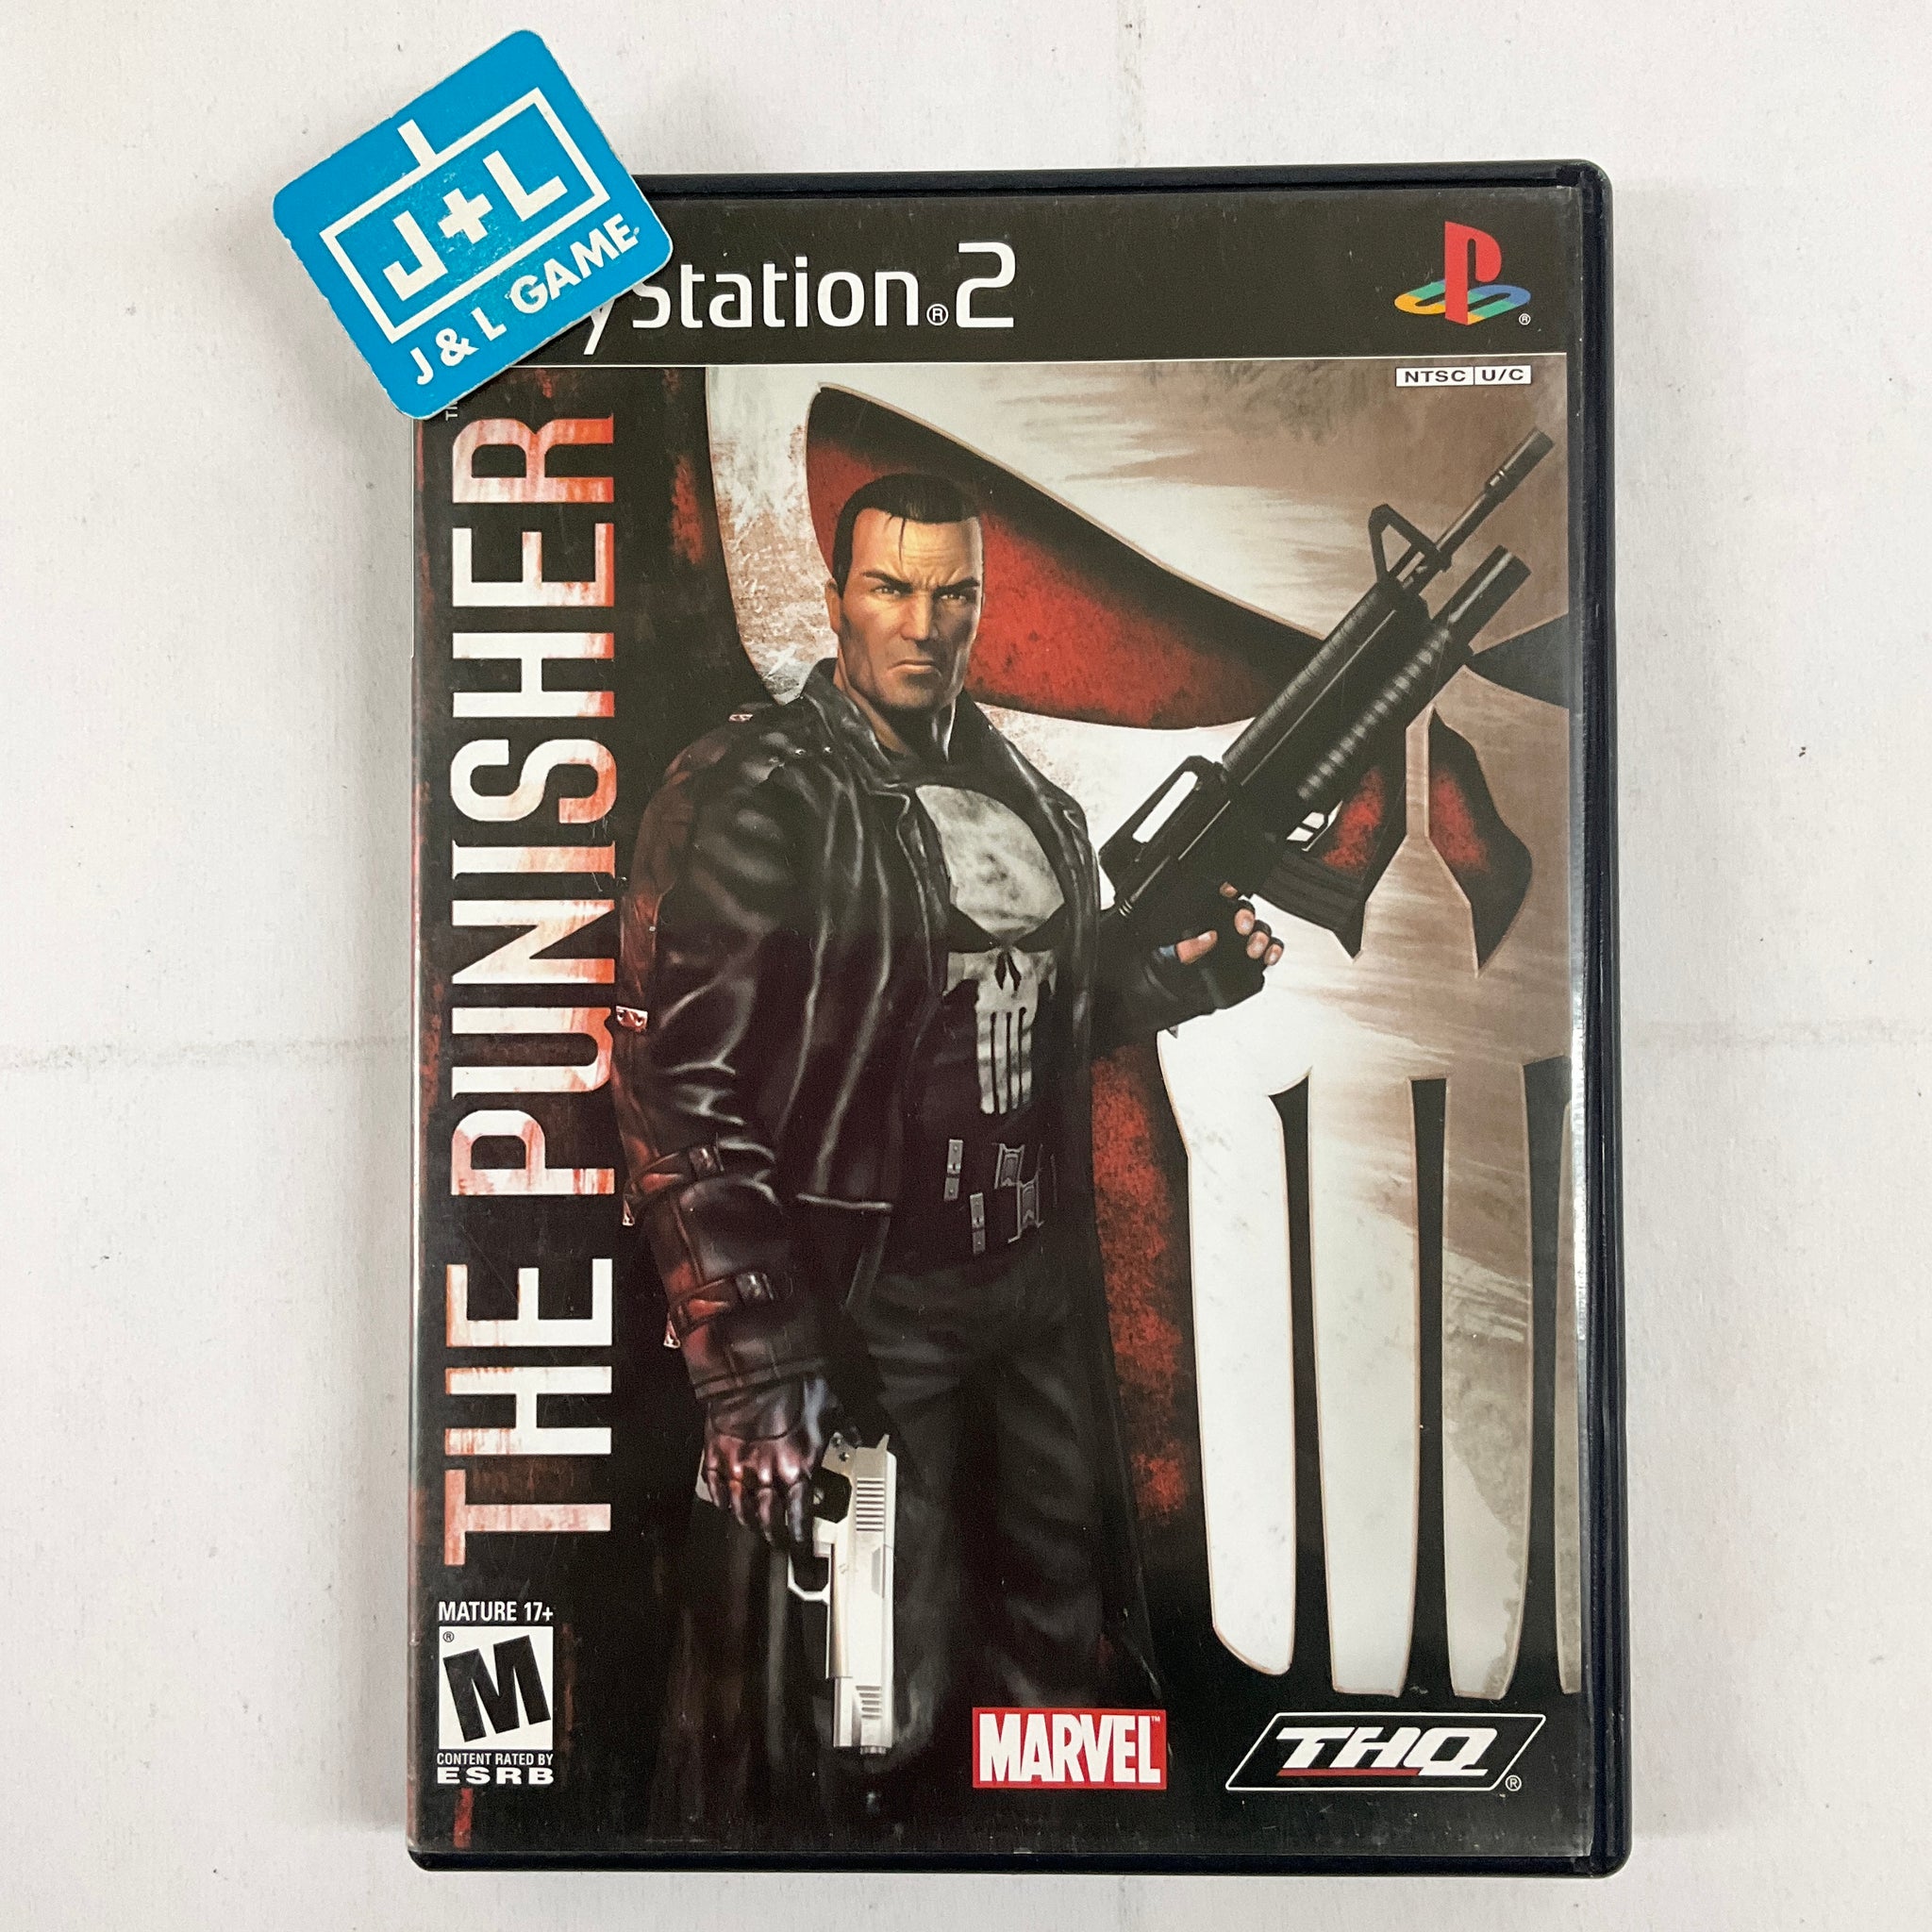 the punisher para ps2